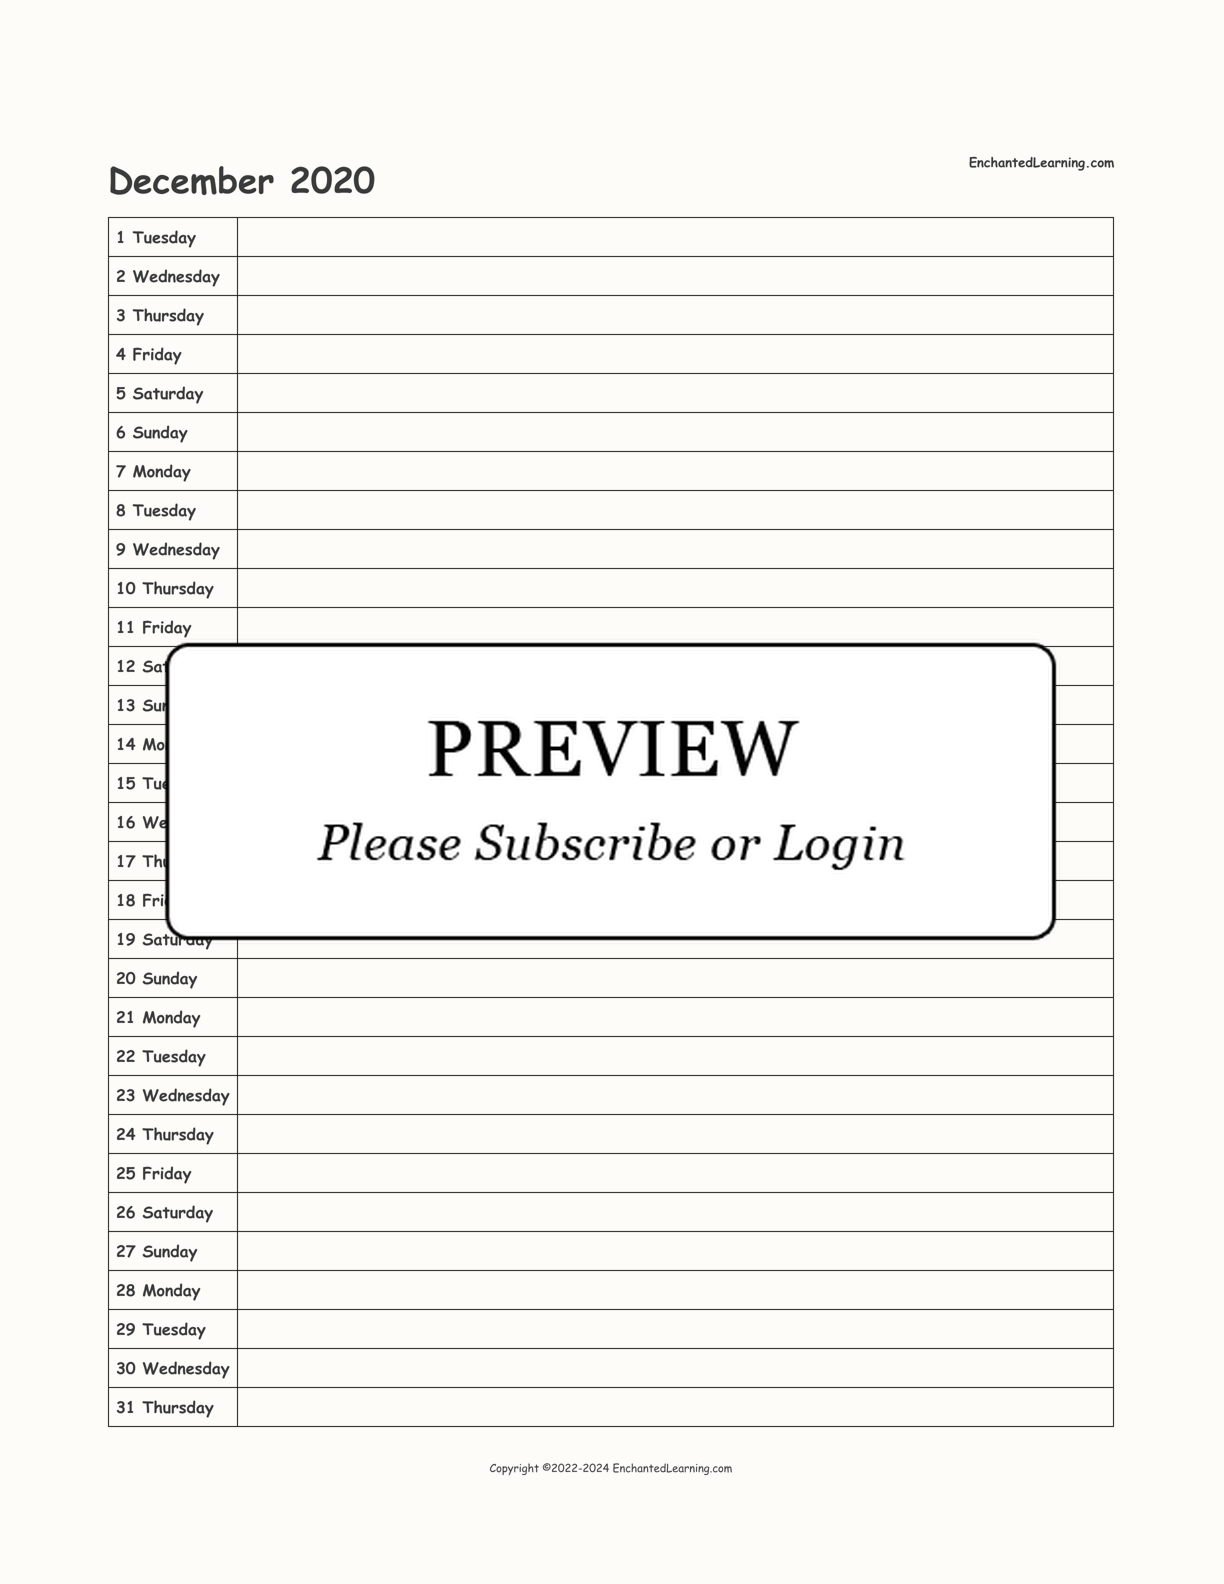 2020 Scheduling Calendar interactive printout page 12